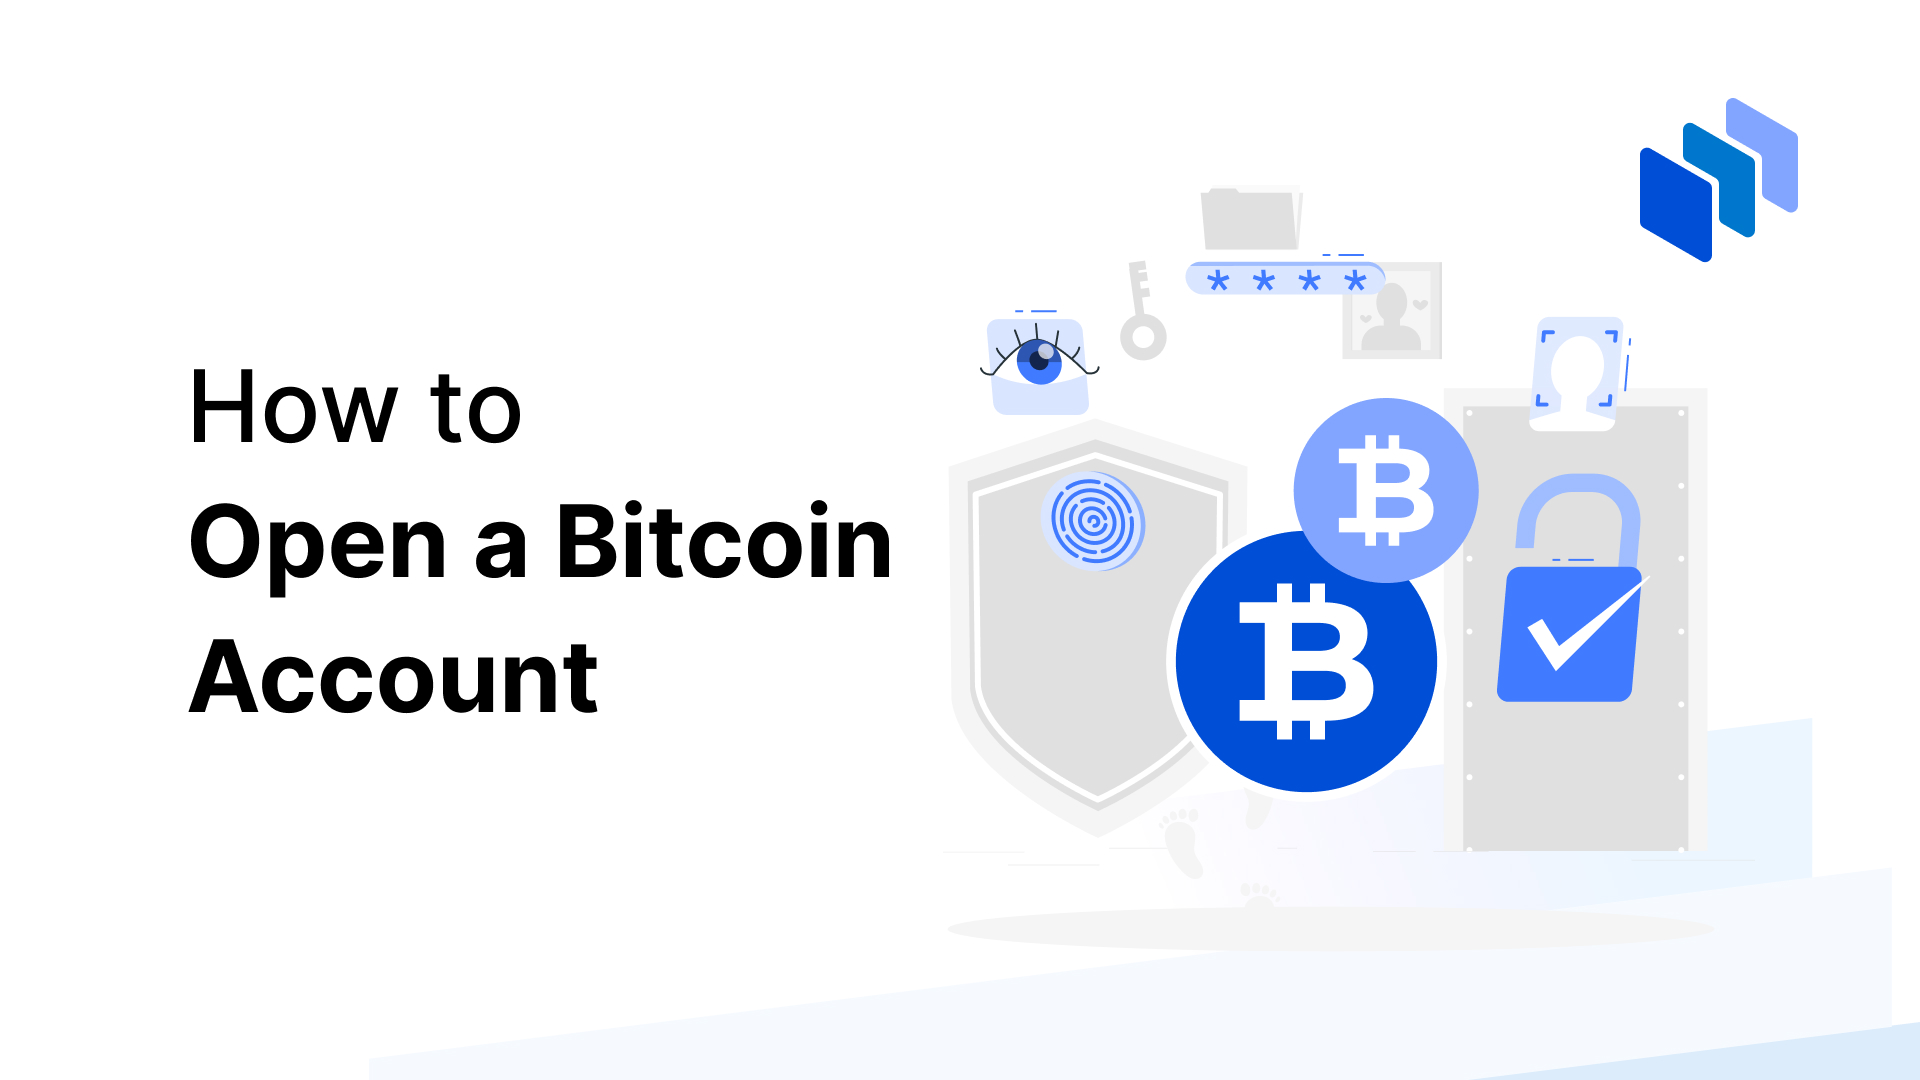 How to Open a Bitcoin Account